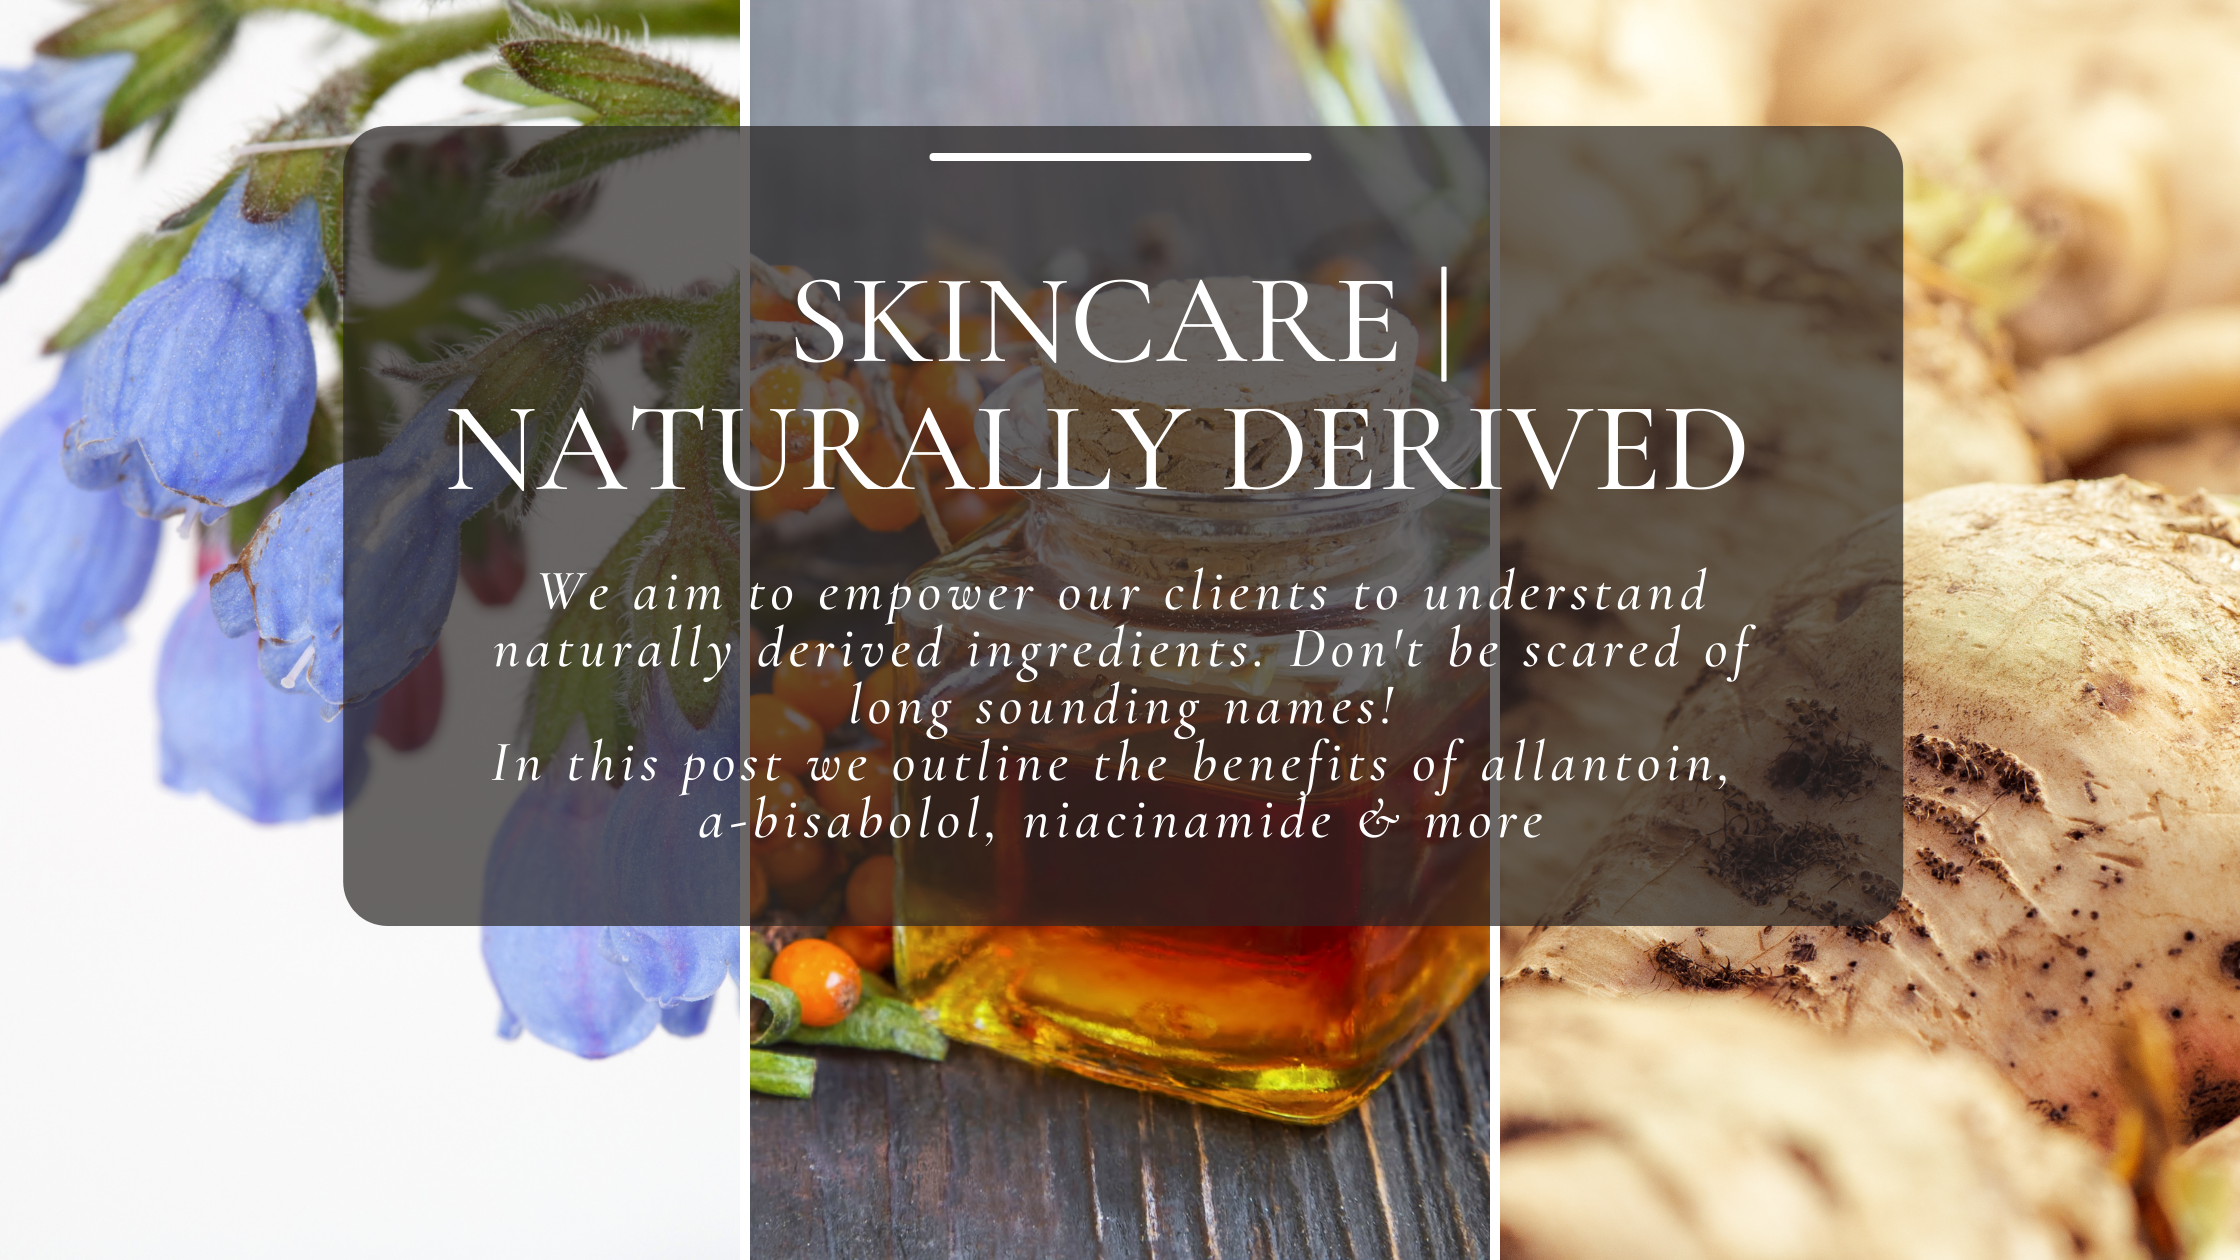 Image of sugar beet, seabuckthorn berries, and comfrey with text overlay empowering customers to understand natural skincare